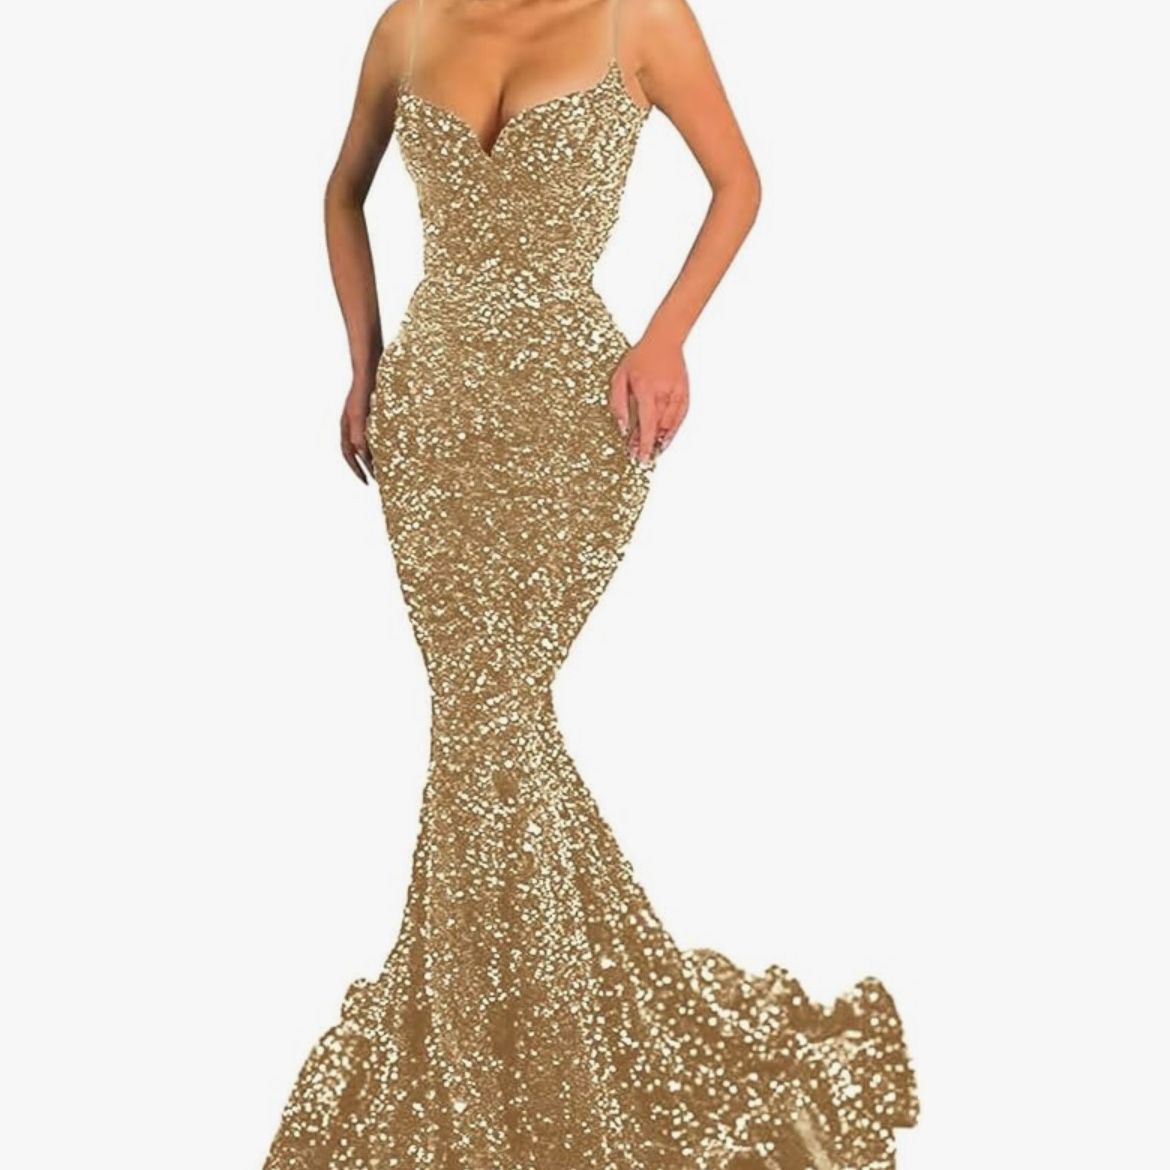 Women's Sparkly Sequin Prom Dresses Long Mermaid V Neck Backless Formal Evening Gowns with Train.  Size 10